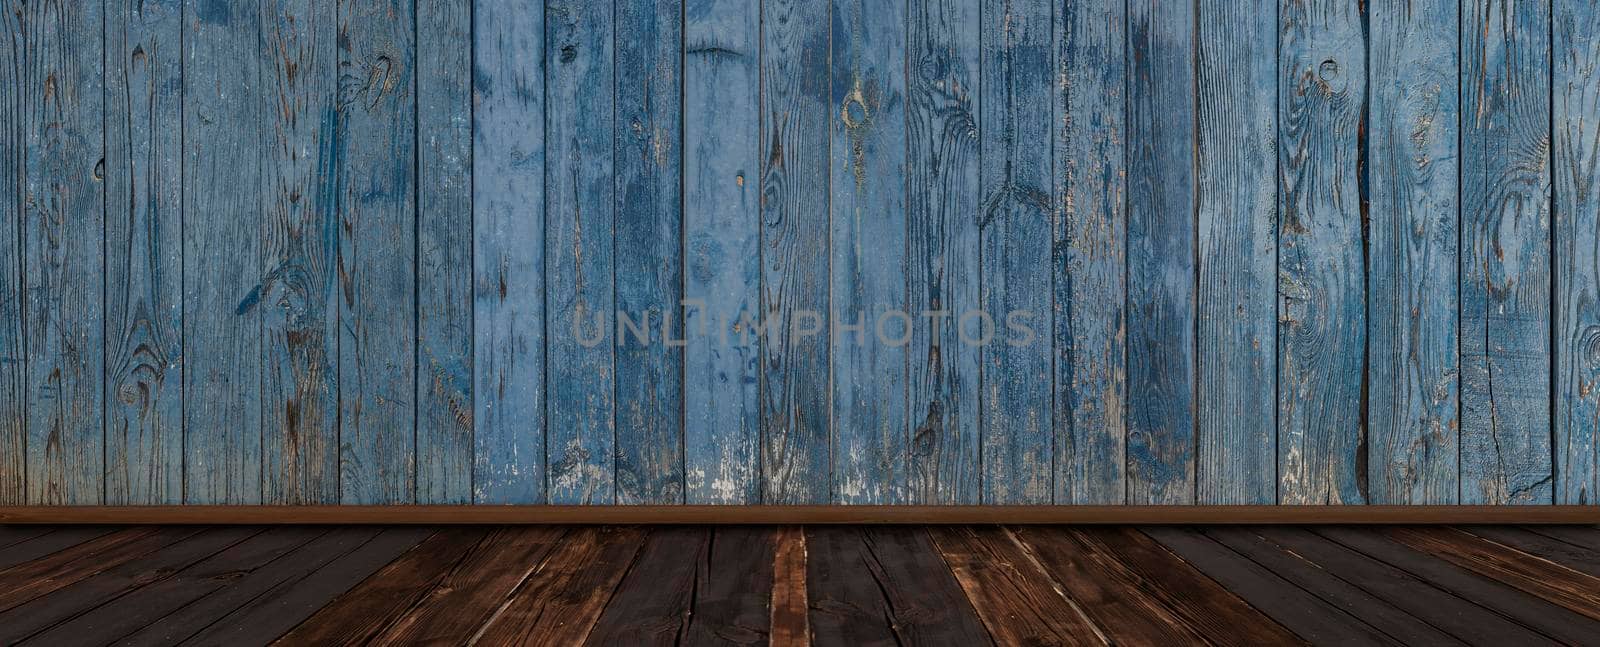 Large empty room - wooden blue wall with dark floor